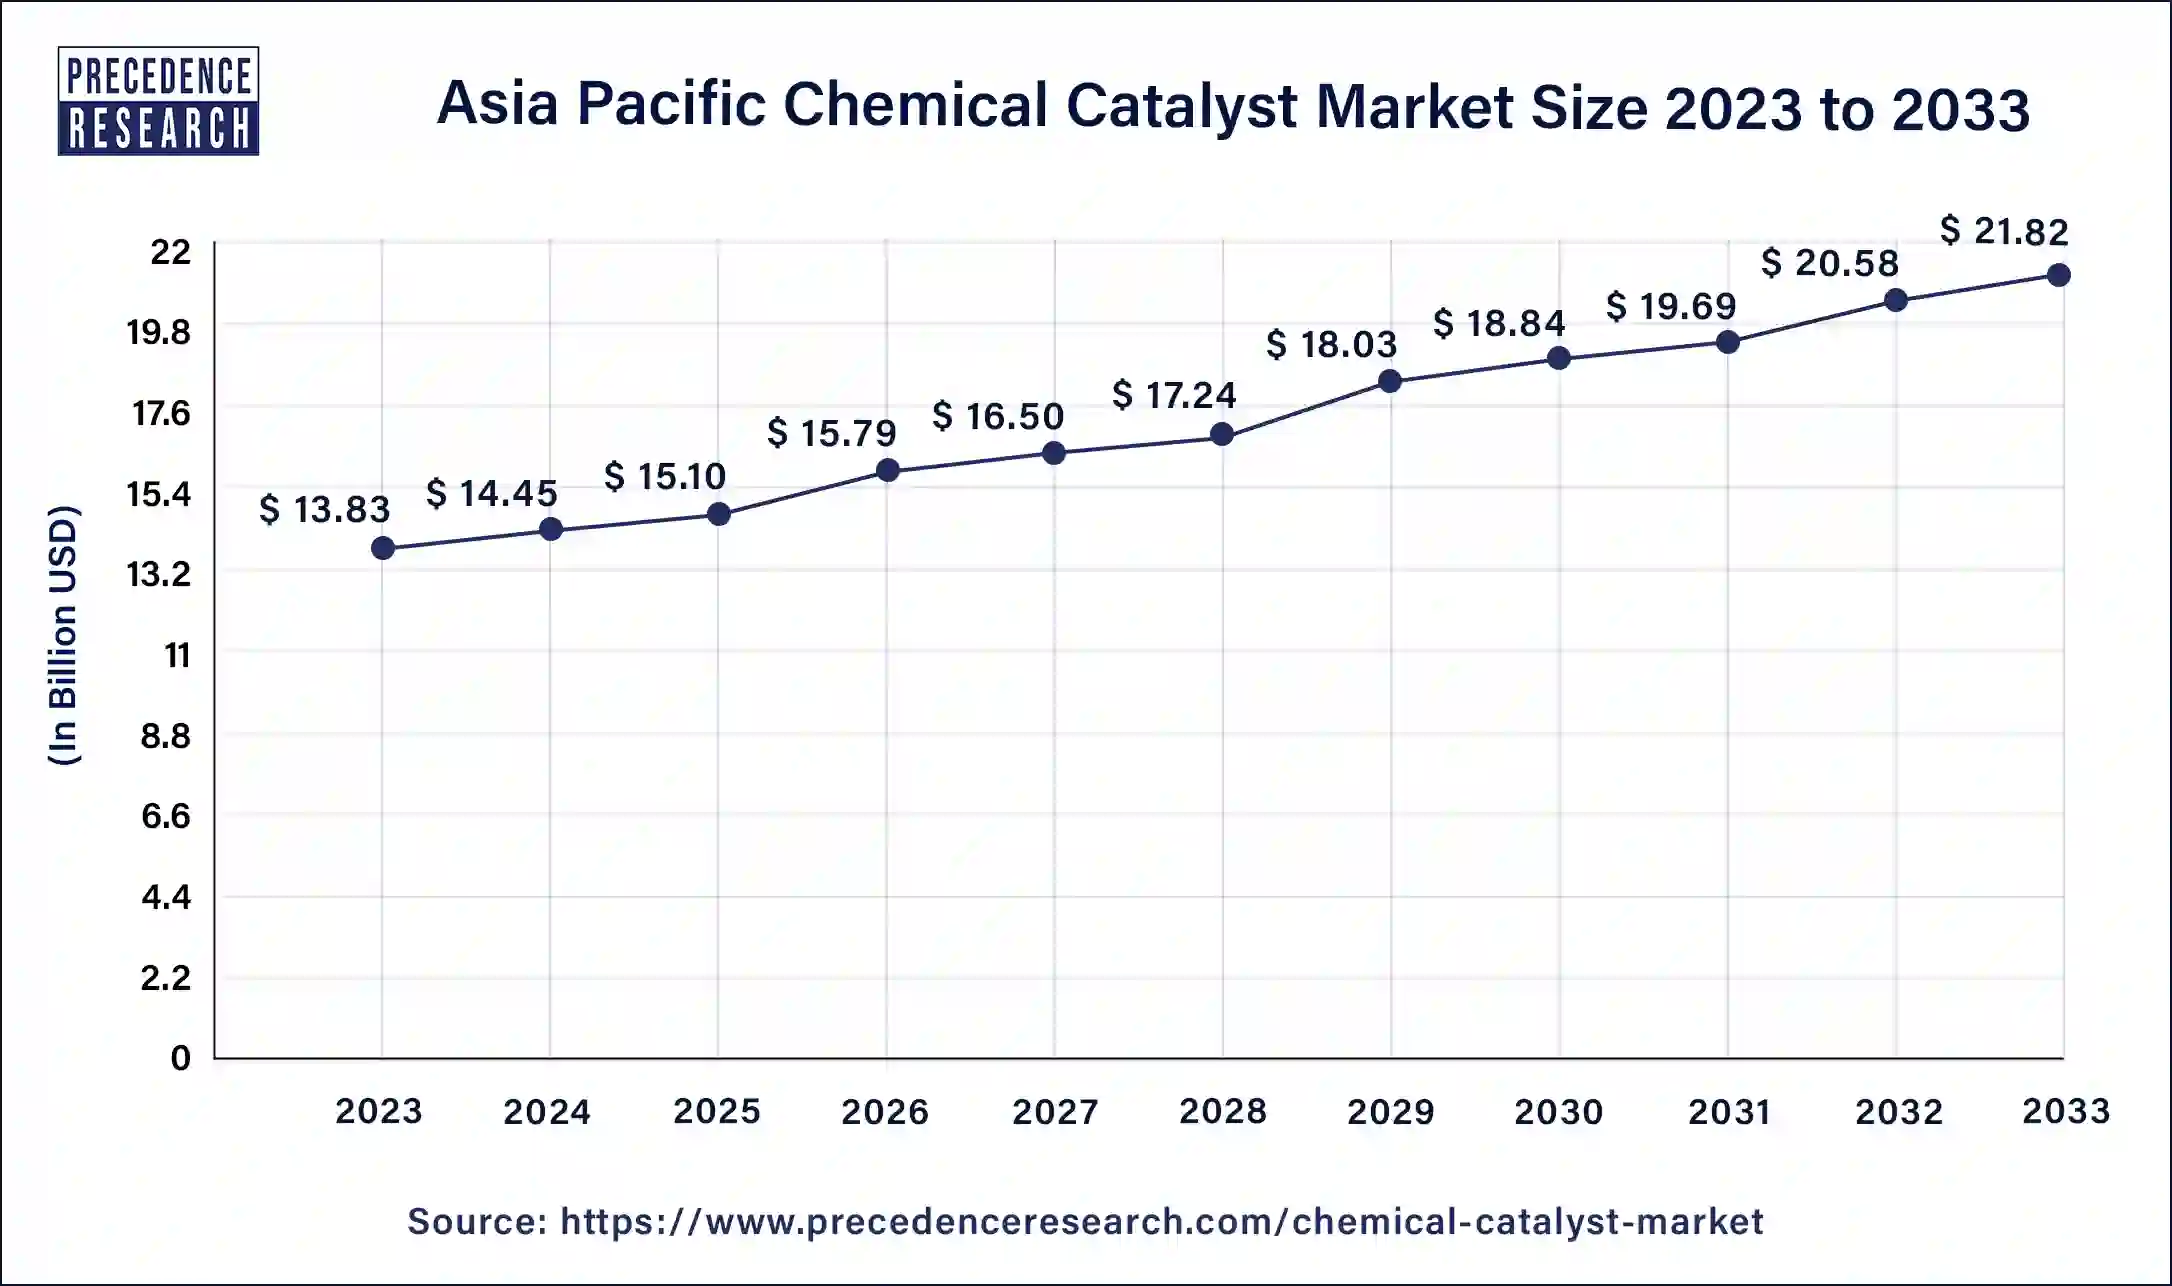 Asia Pacific Chemical Catalyst Market Size 2024 to 2033